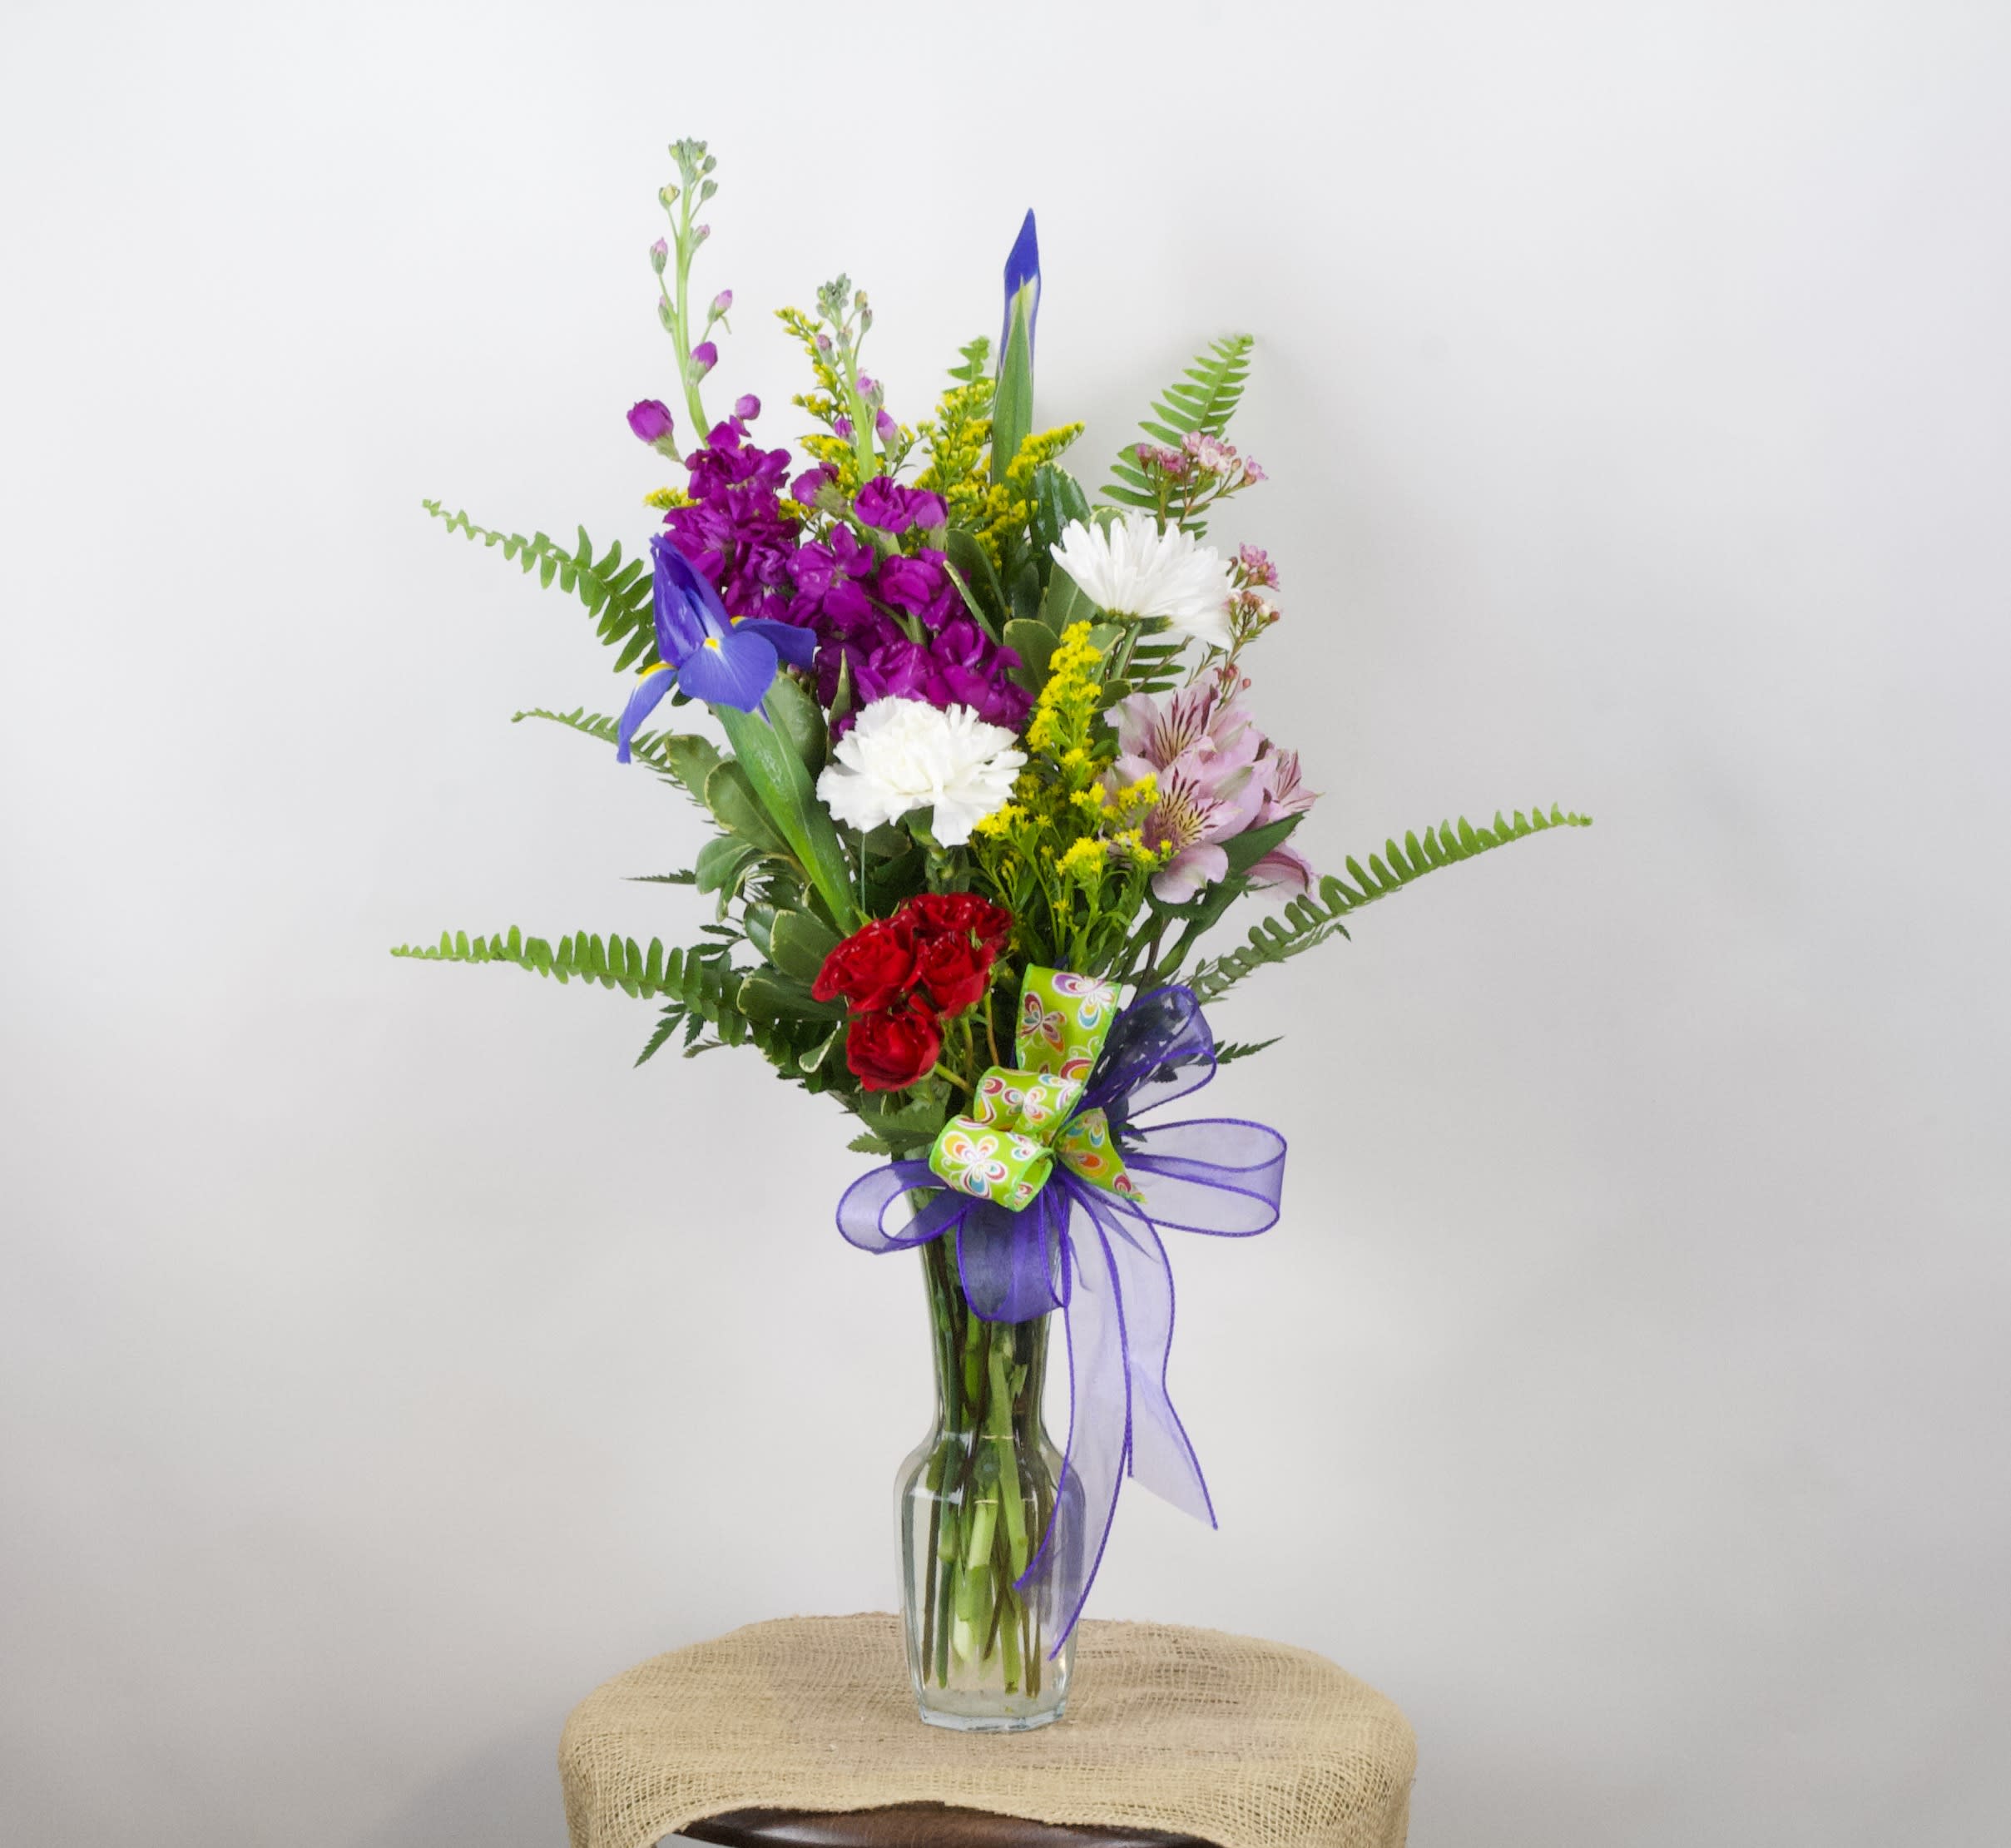 Sweet and Simple - Small vase arrangement with stock, carnations, and more.